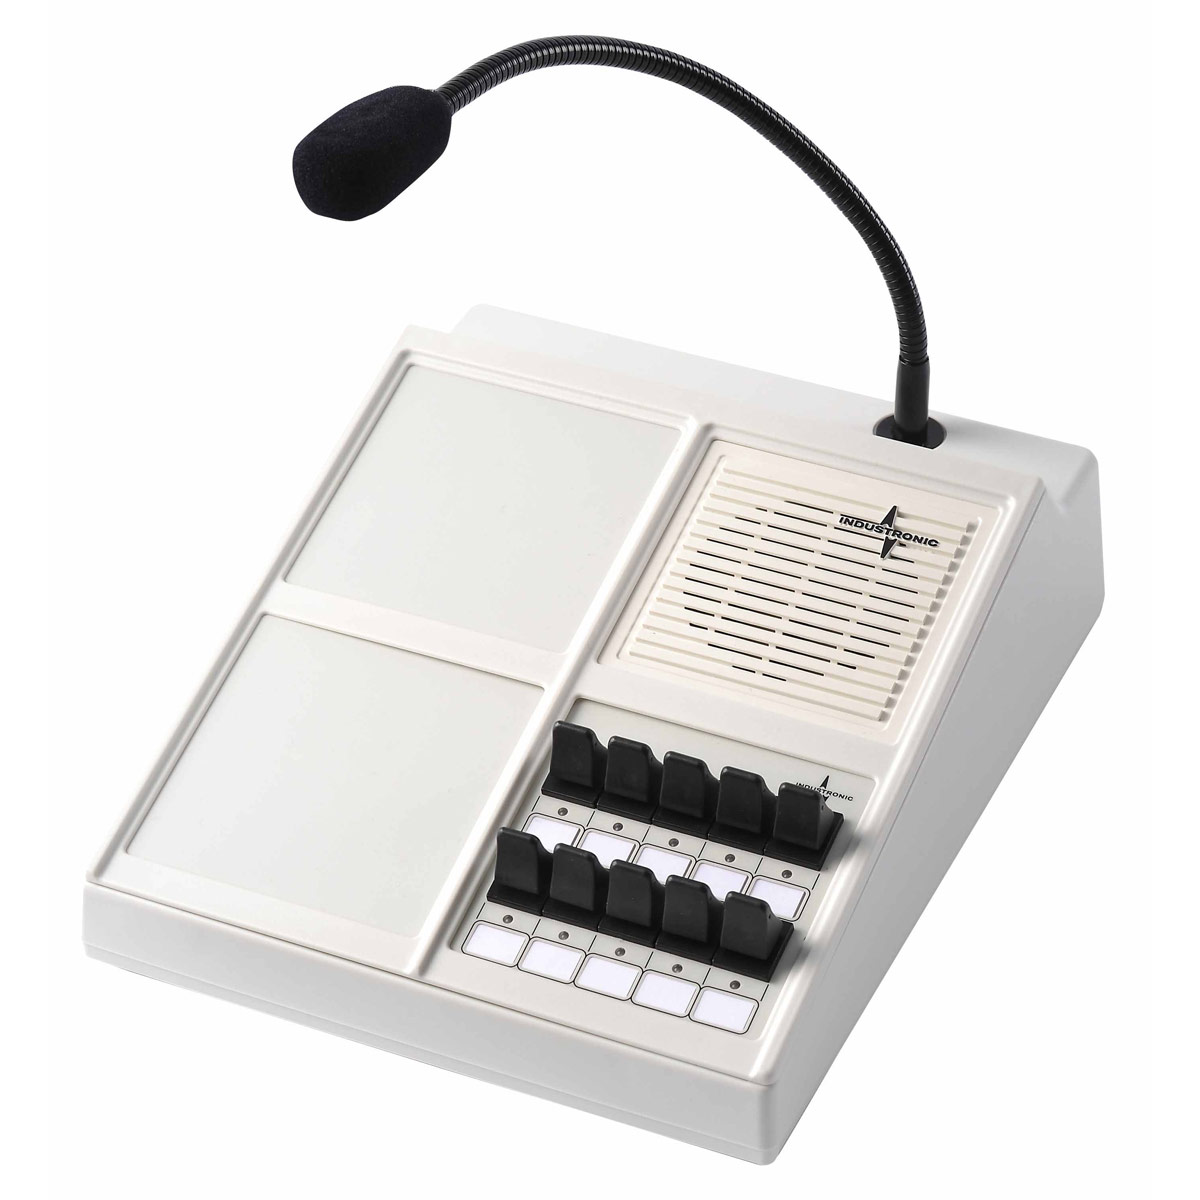 Digital Intercom Station with gooseneck microphone, membrane keypads with 16 keys or keypad with 10 momentary switches